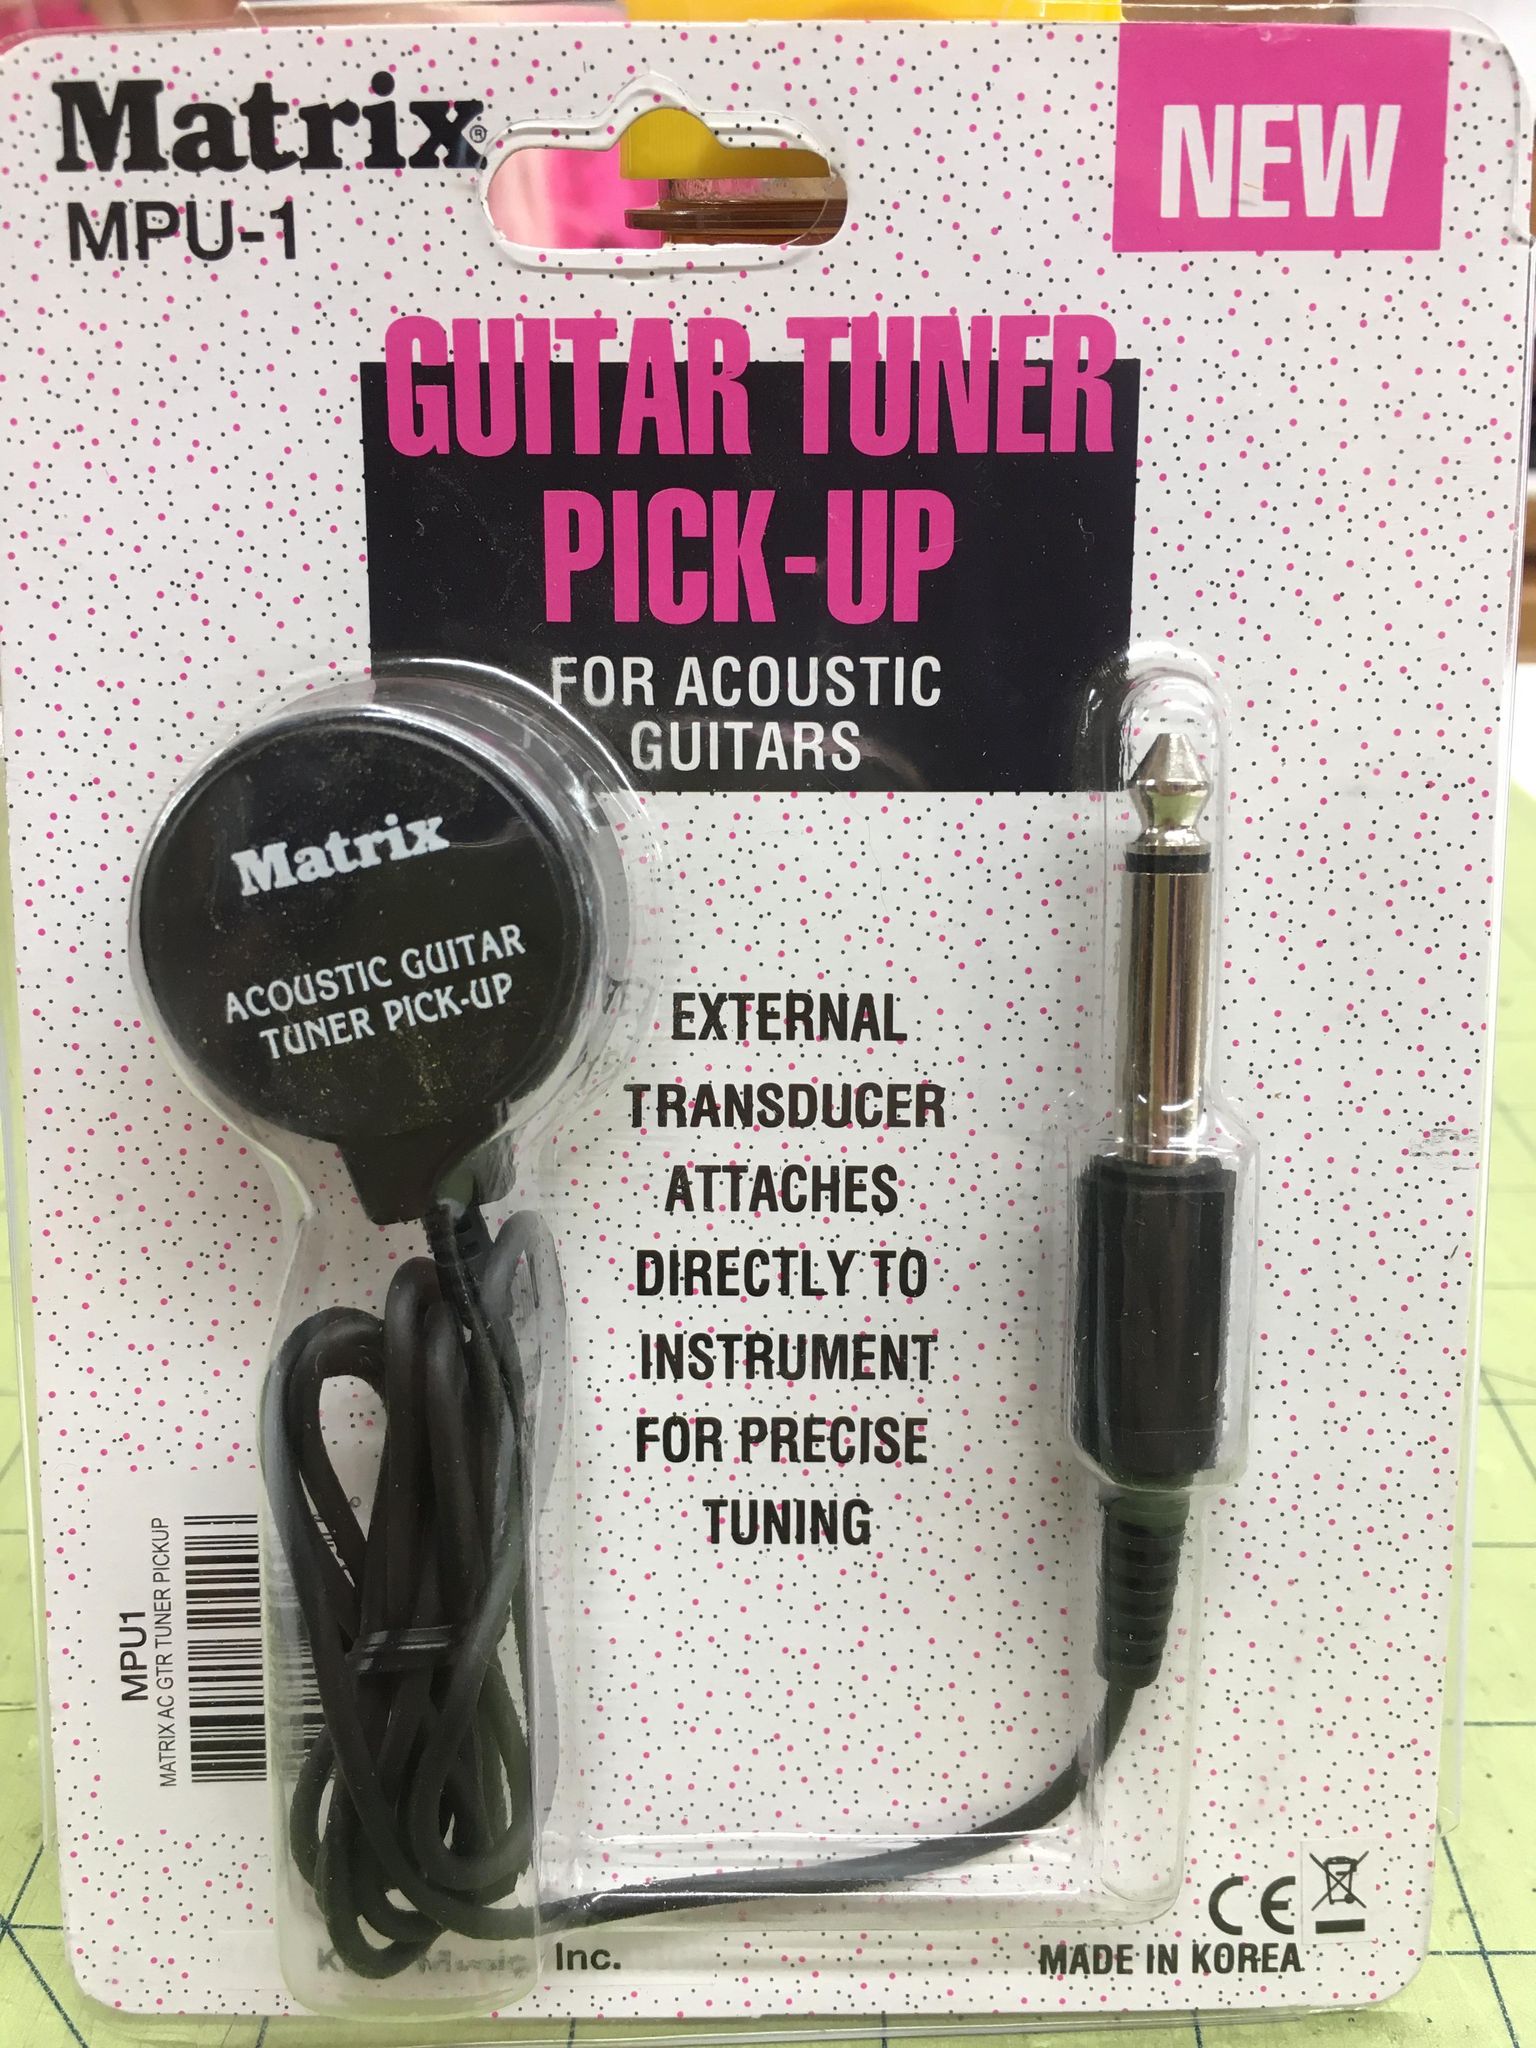 A package of a matrix guitar pick up.